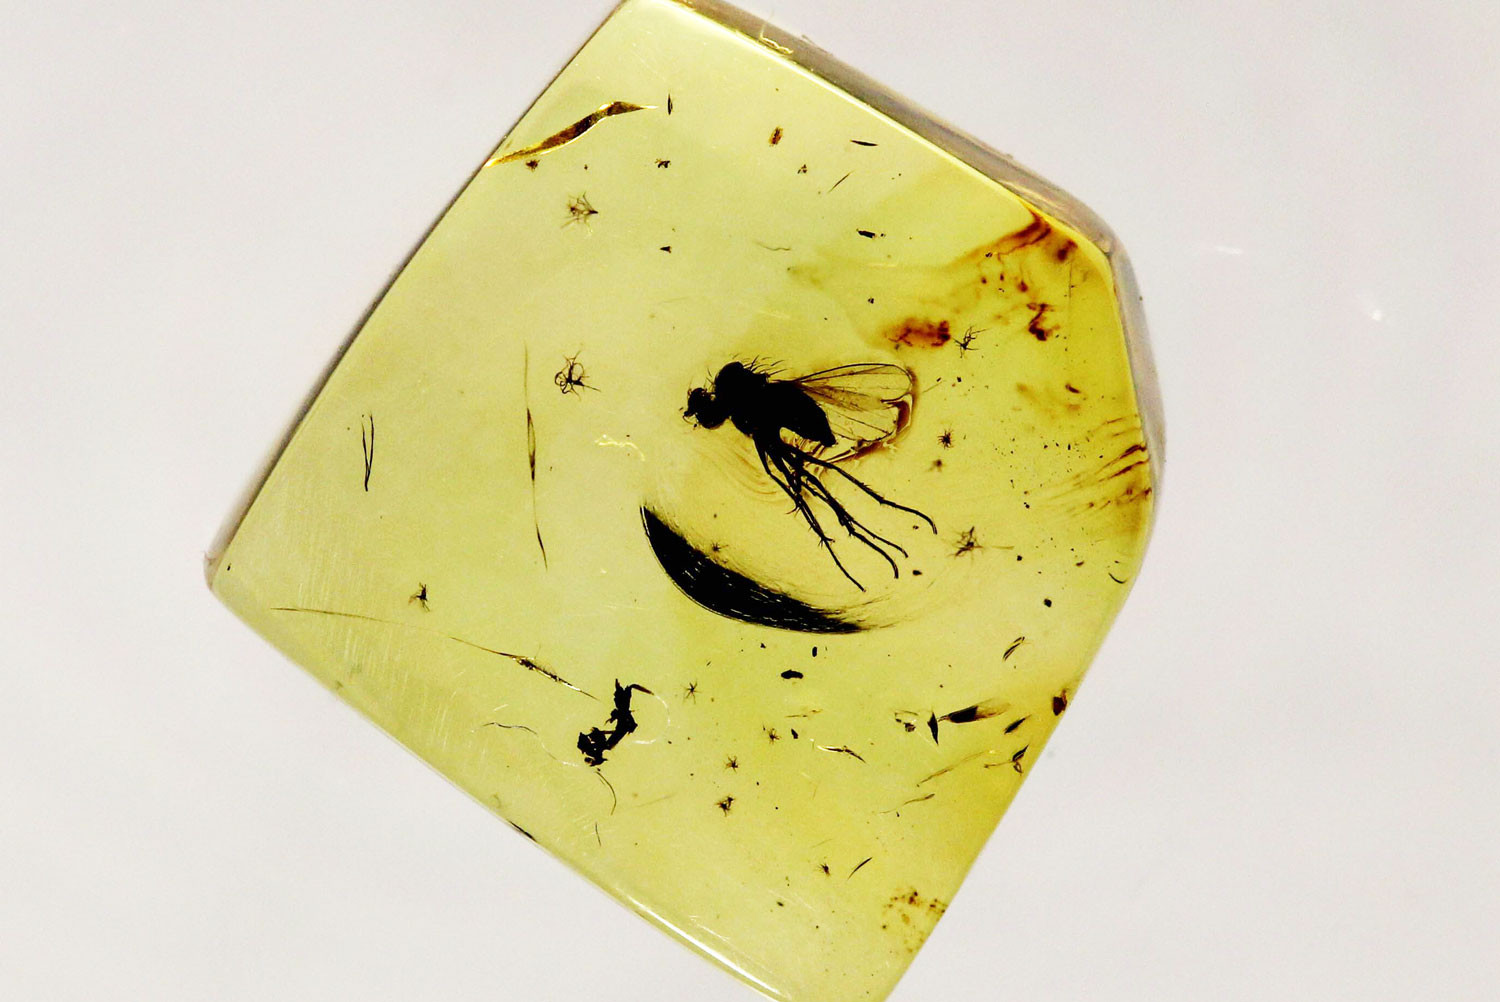 <p>Фото: &copy;&nbsp;<a href="https://commons.wikimedia.org/wiki/Category:Amber?uselang=ru#/media/File:Fossil_insect_Diptera,_Brachycera_in_Baltic_amber._Age_50_Mill._years_(the_Lower_Eocene).jpg" target="_blank">wikimedia.org</a></p>